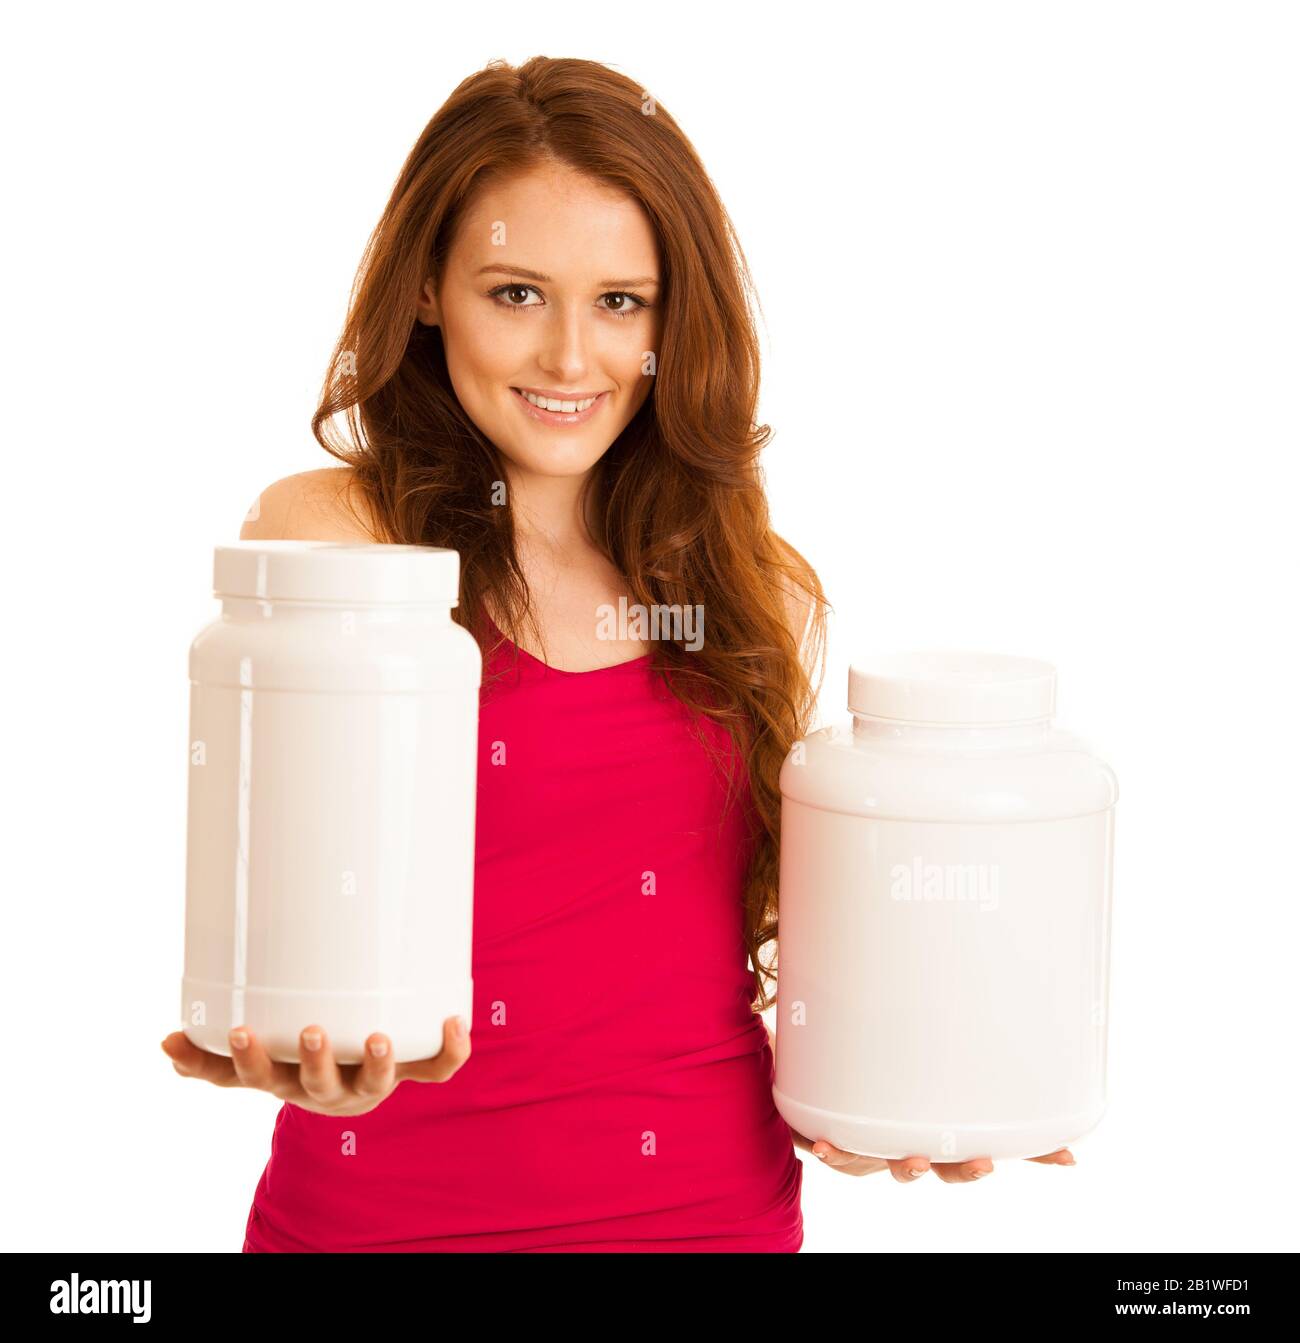 https://c8.alamy.com/comp/2B1WFD1/attractive-beautiful-sporty-woman-holds-blank-plastic-protein-container-2B1WFD1.jpg